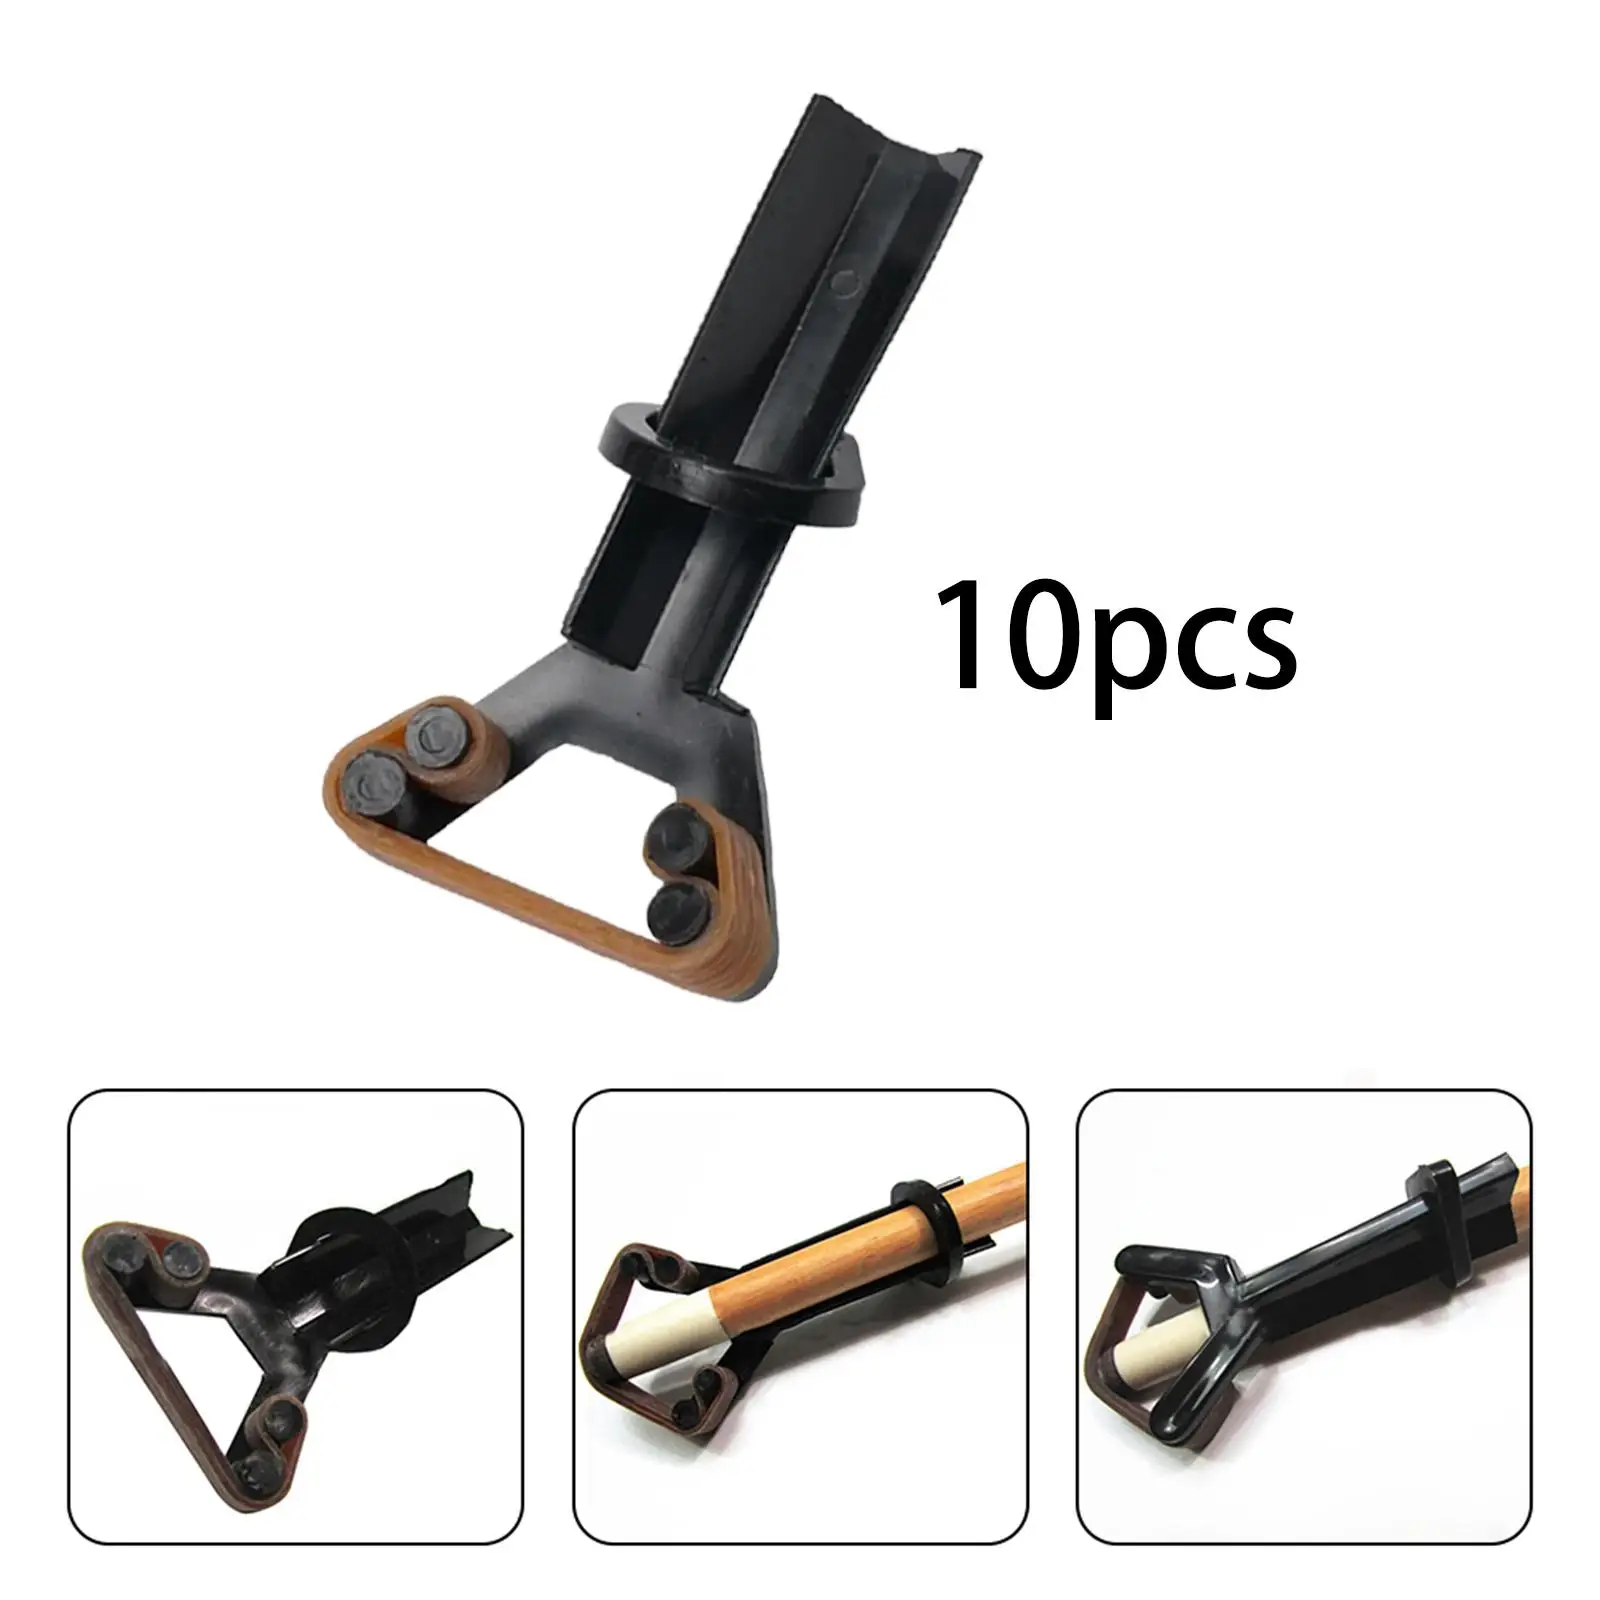 10Pcs Pool Cue Tip Clamp Lightweight Snooker Cue Tip Clamp Fastener Repair Tool for Club Indoor Competition Billiard Party